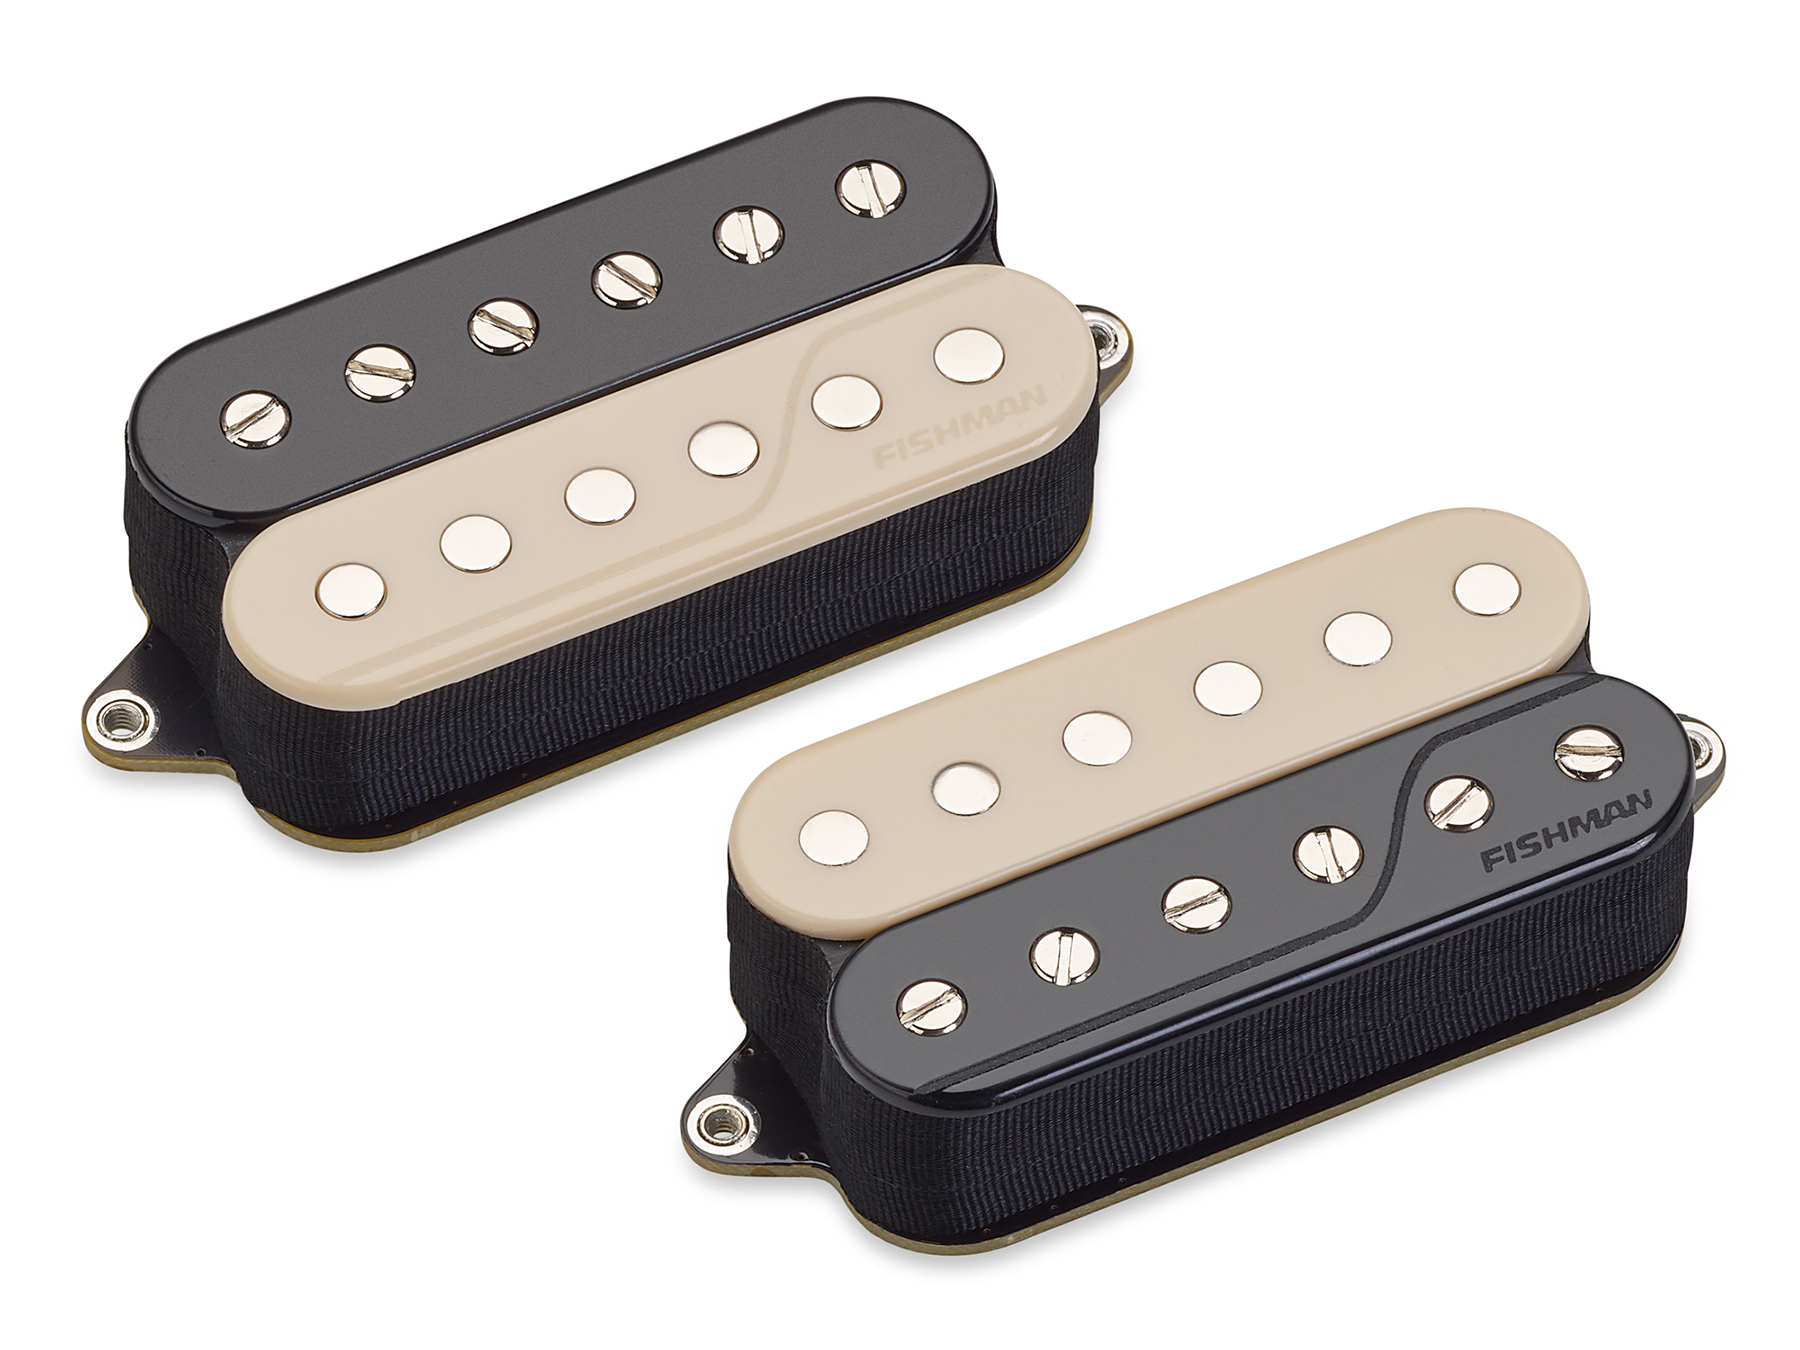 Check out the new Fishman Fluence Open Core Classic pickups